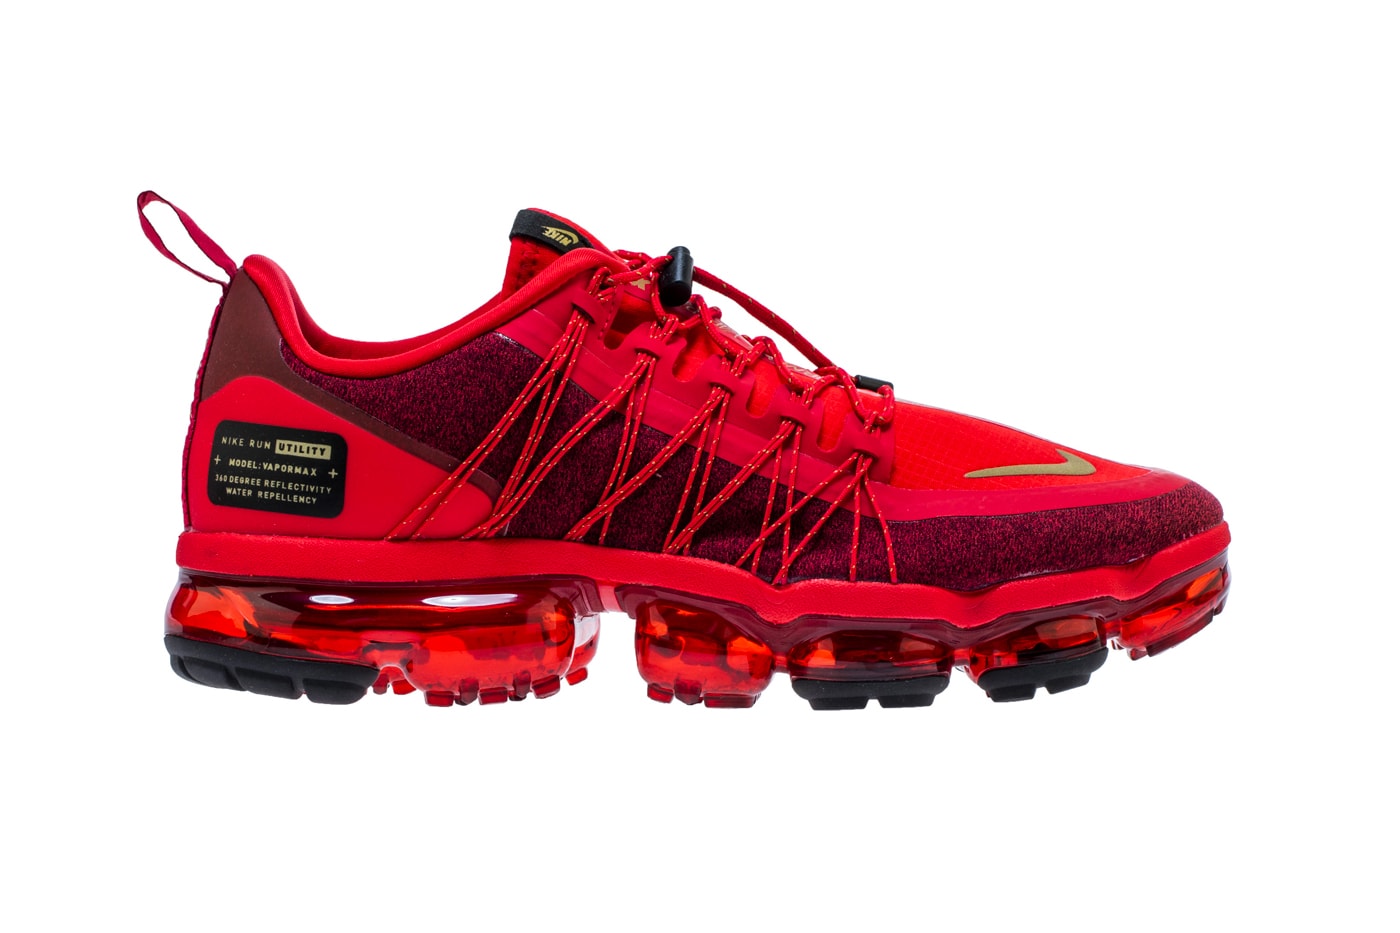 Nike Air VaporMax Utility CNY Release Date red sneaker february 2019 chinese new year